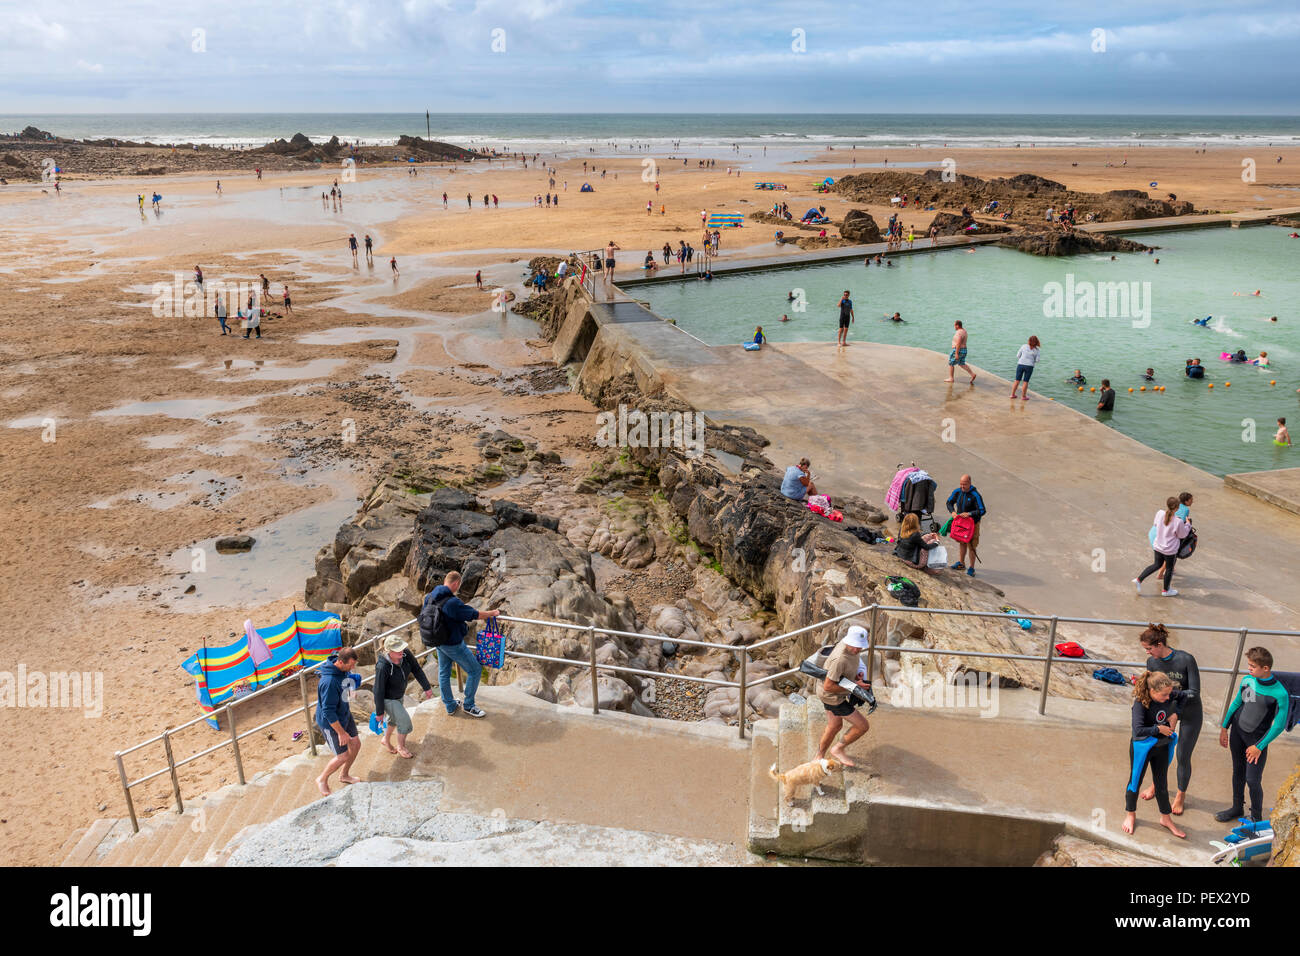 UK Weather - On a day of sunny spells with increasing cloud, the open air seapool on the seafront at Bude proves popular with holidaymakers, despite t Stock Photo